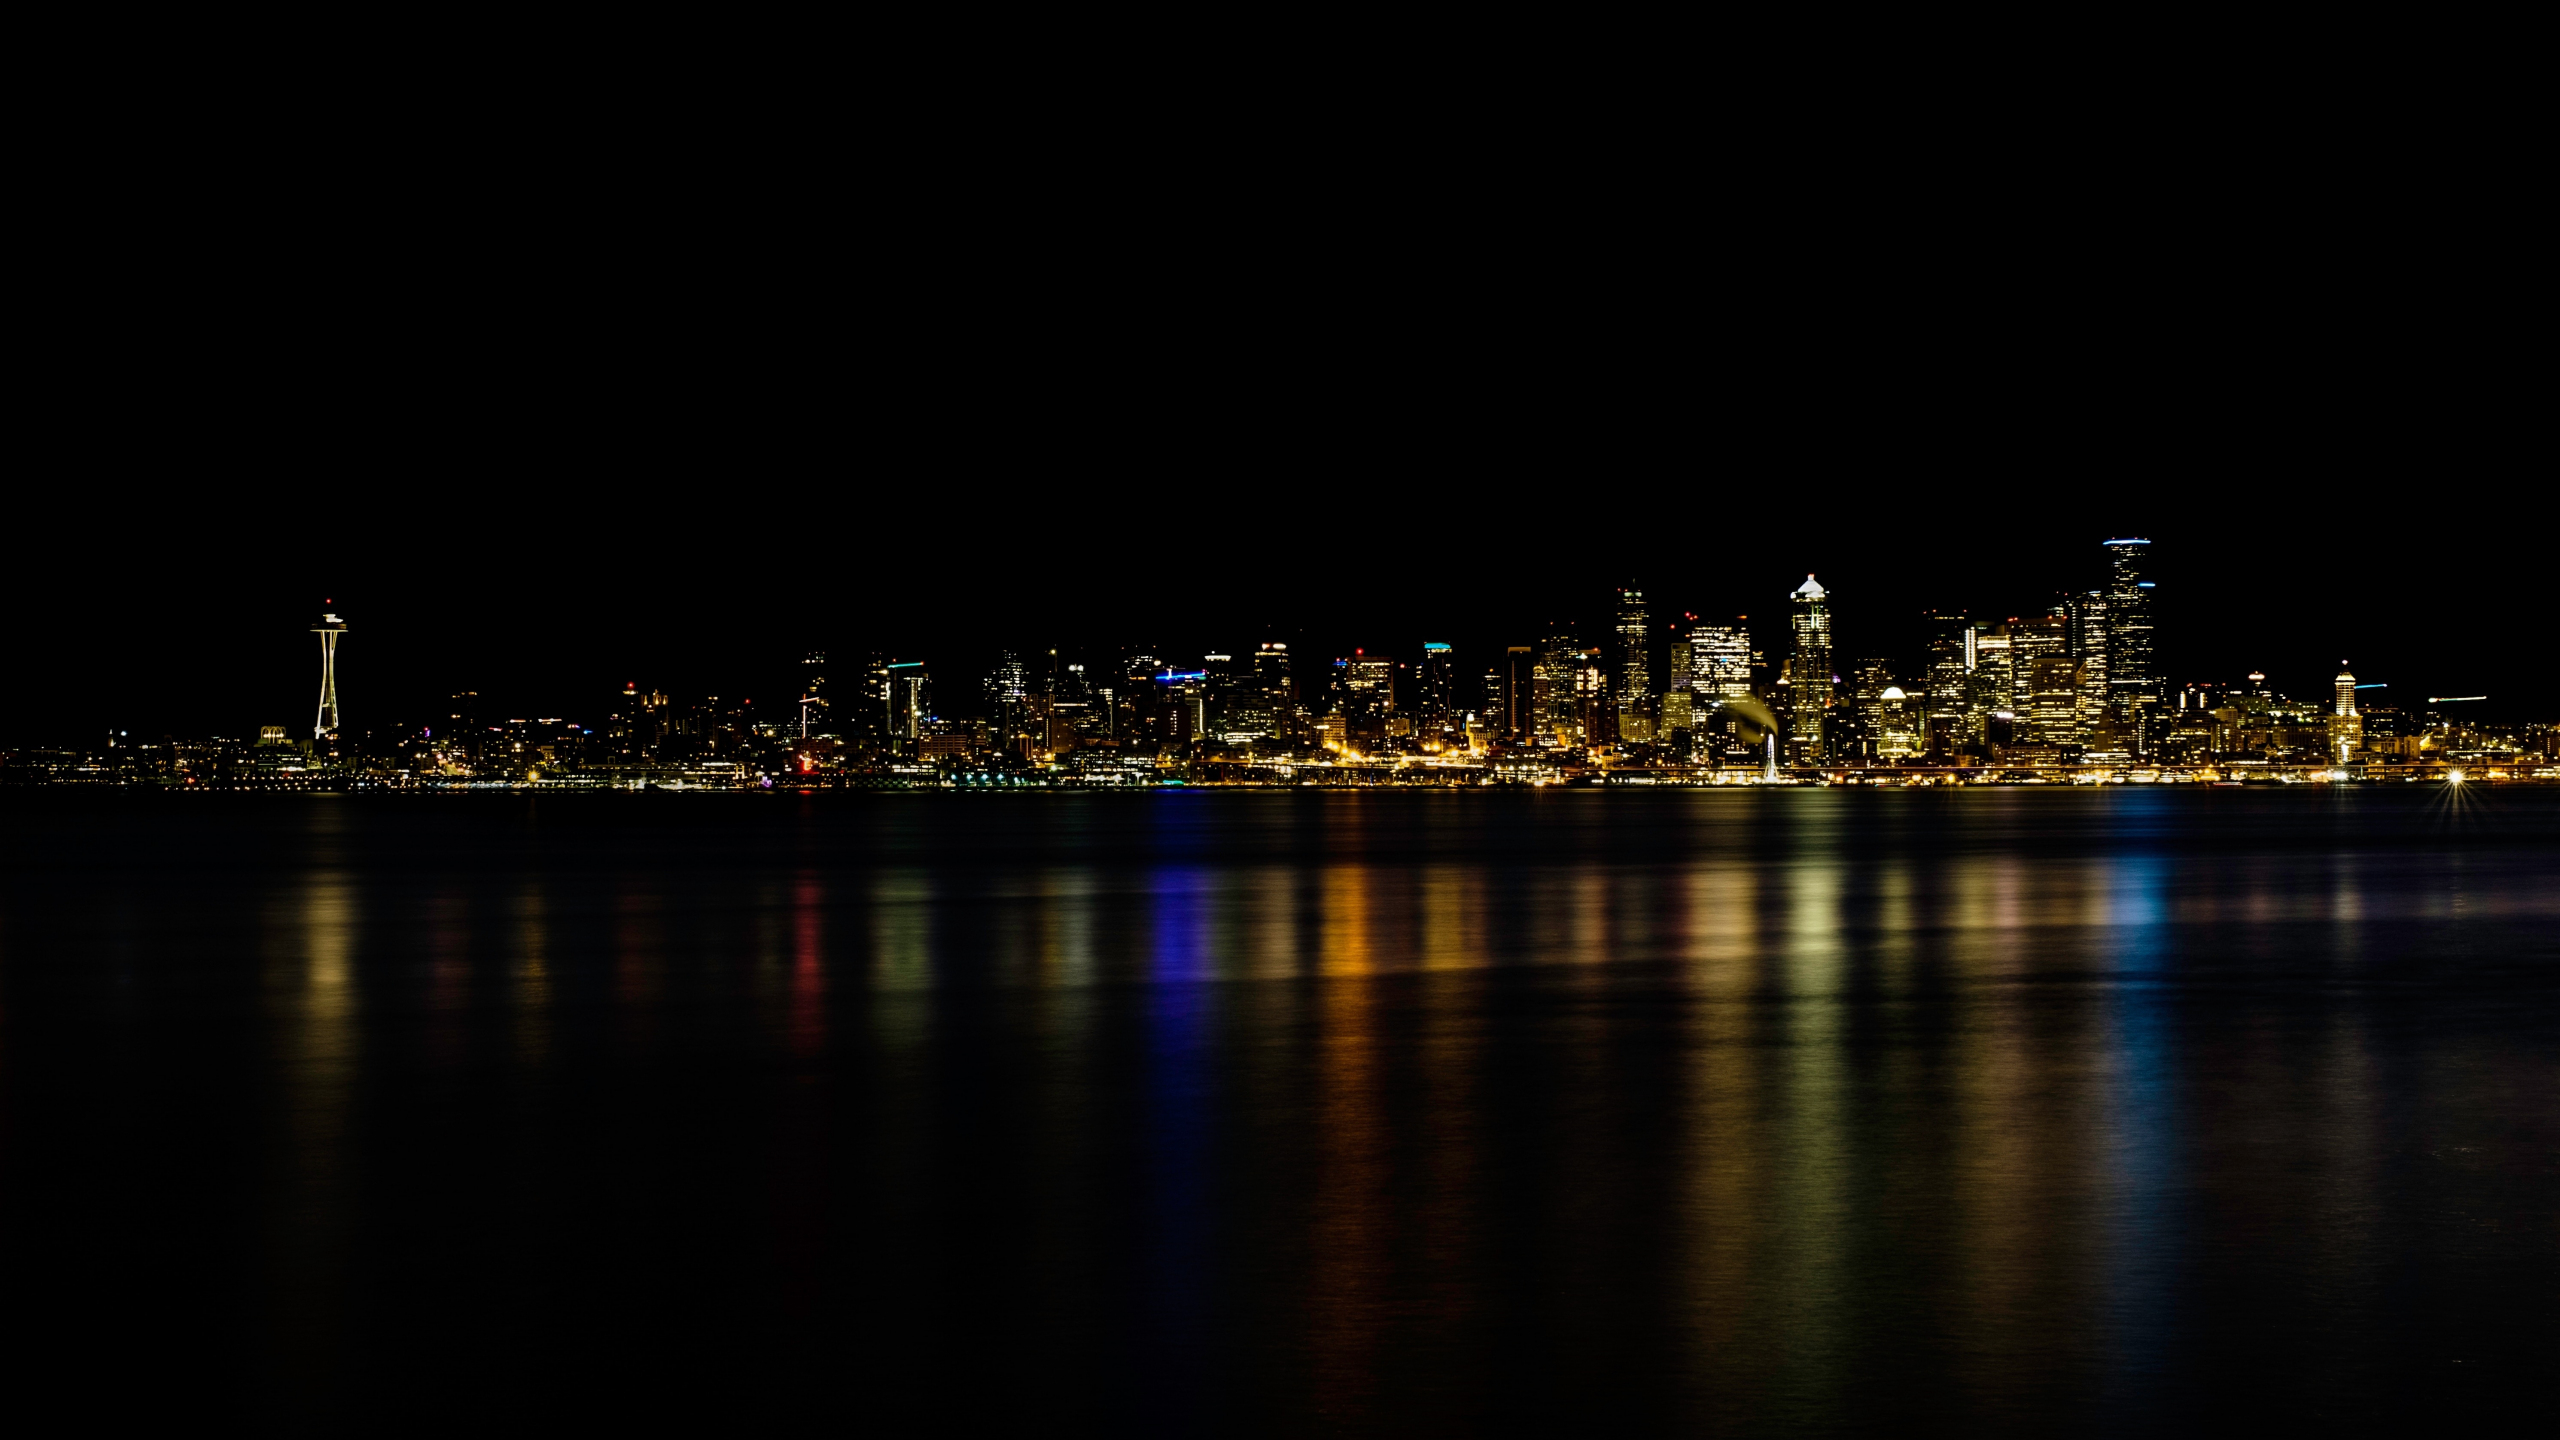 2560x1440 Download minimal, cityscape, seattle wallpaper, dual wide 16:9 hd image, background, 19570